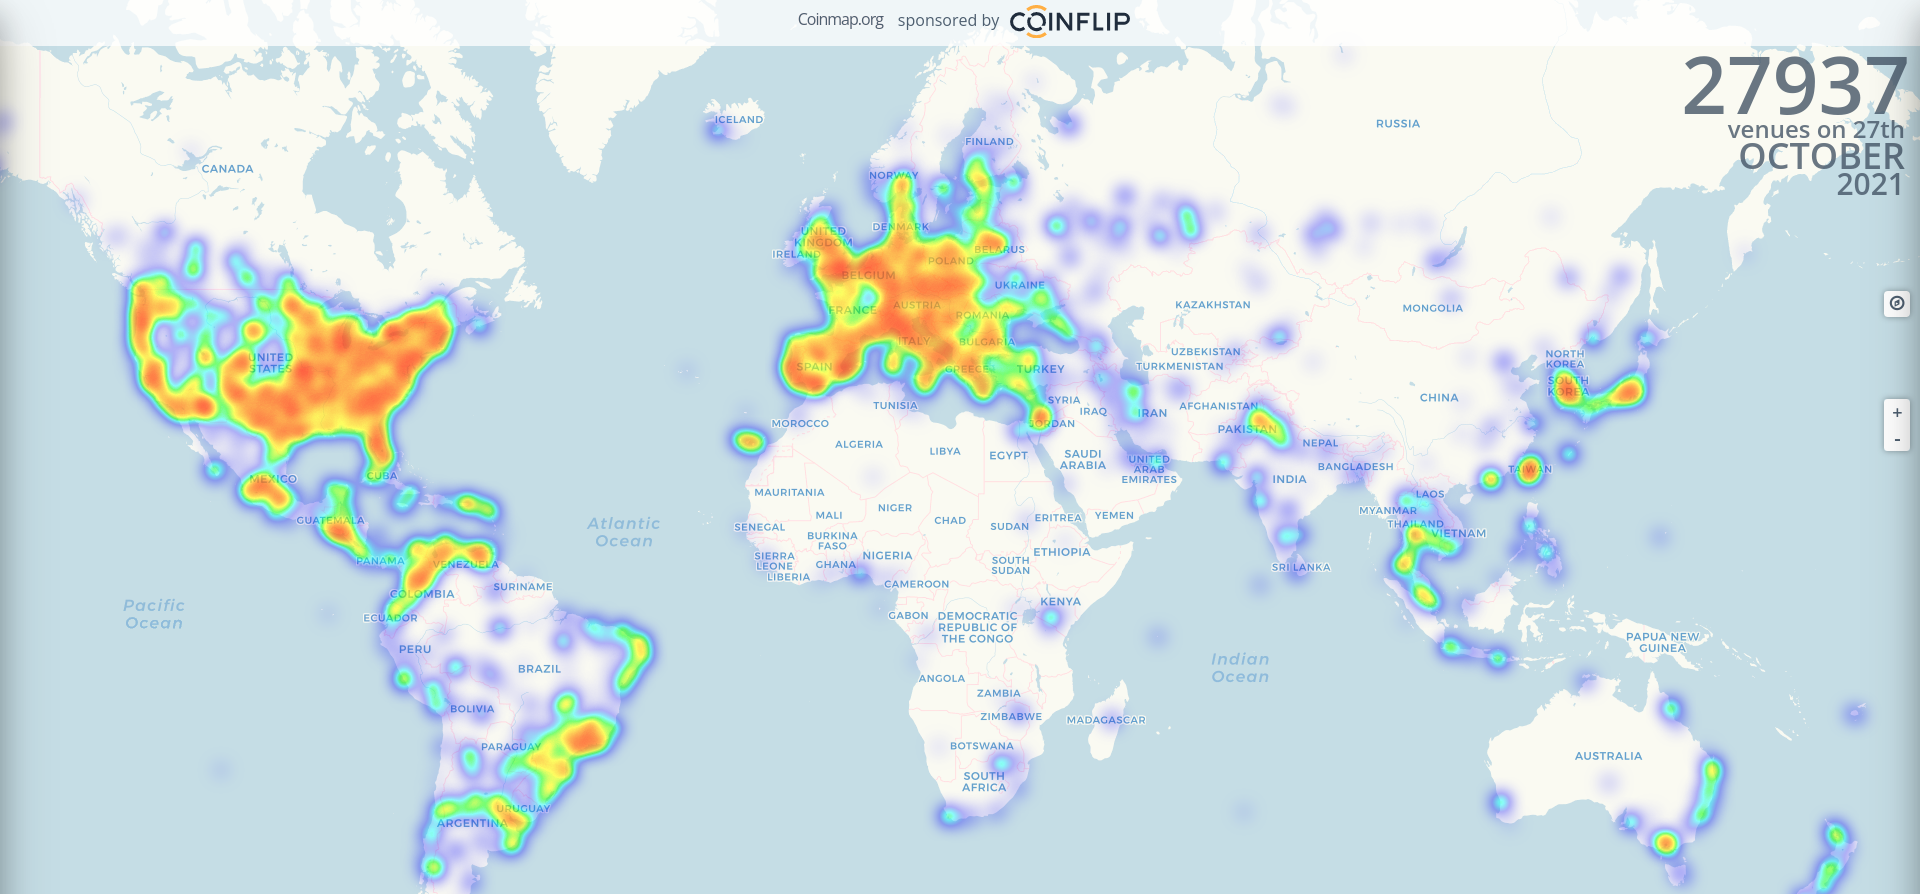 A global view of Coinmap's heatmap showing 27937 venues as of October 27, 2021.